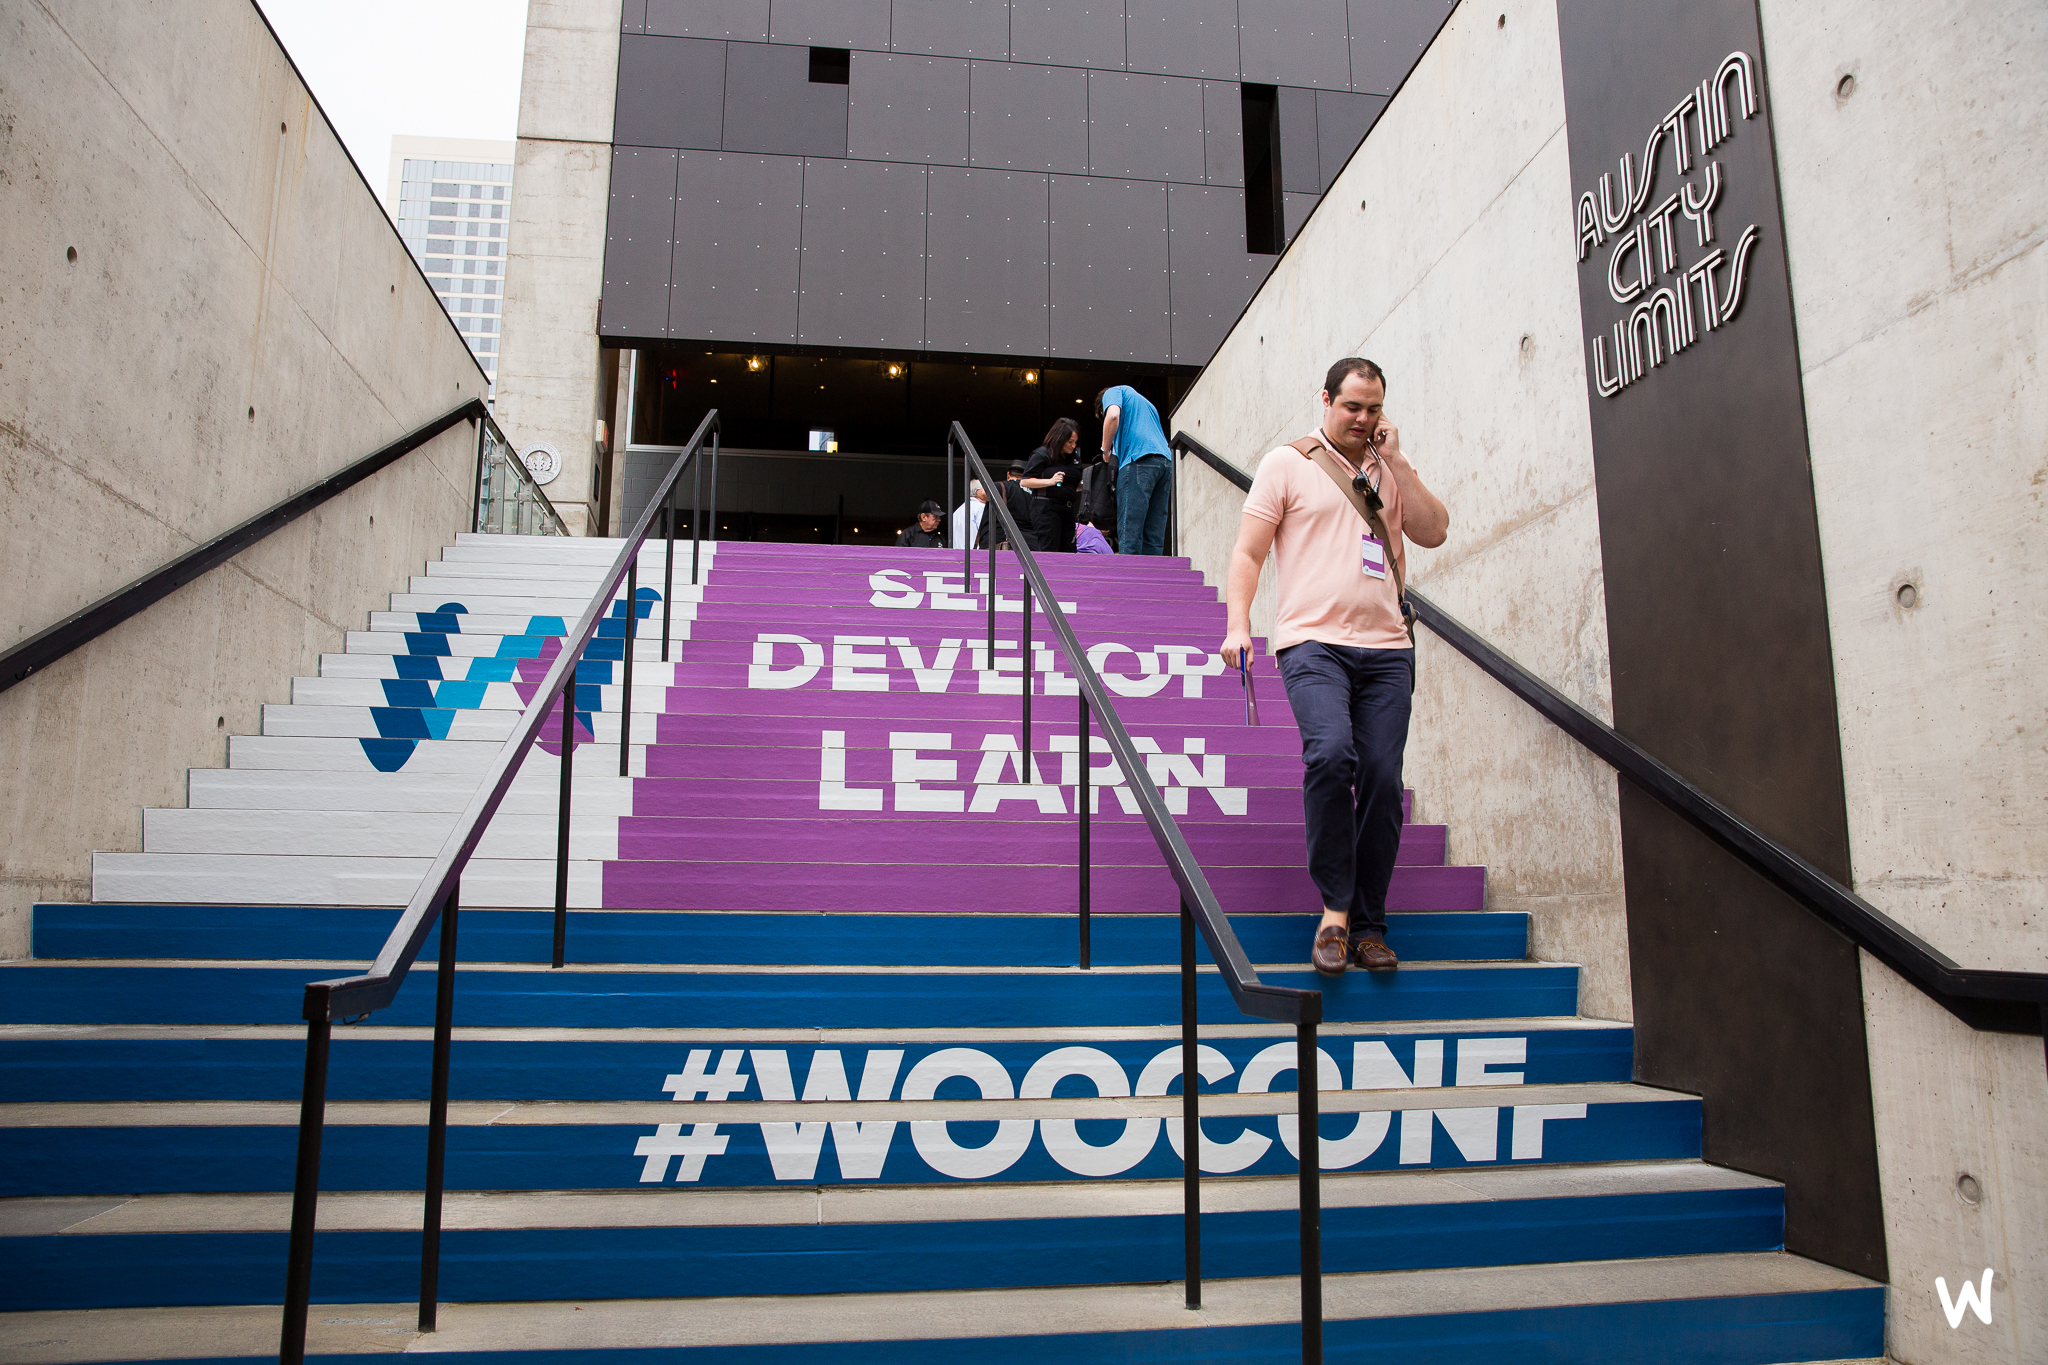 WooConf aimed to be a great opportunity to connect, learn, and develop your skills, whether you were a store owner just starting out or an experienced developer.